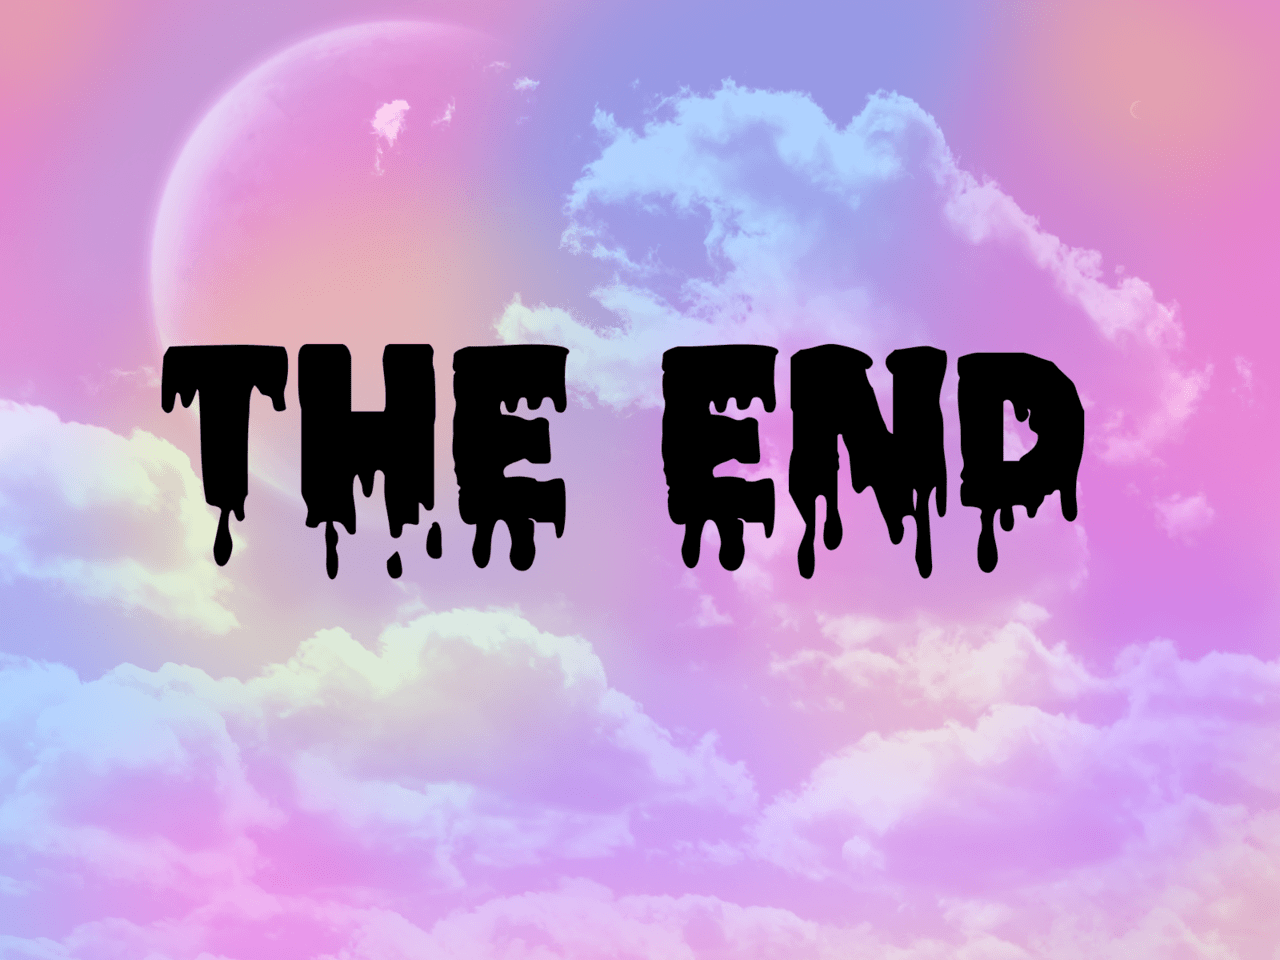 The end is beautiful. The end картинка. The end надпись. Красивая надпись the end. Фон с надписью конец.